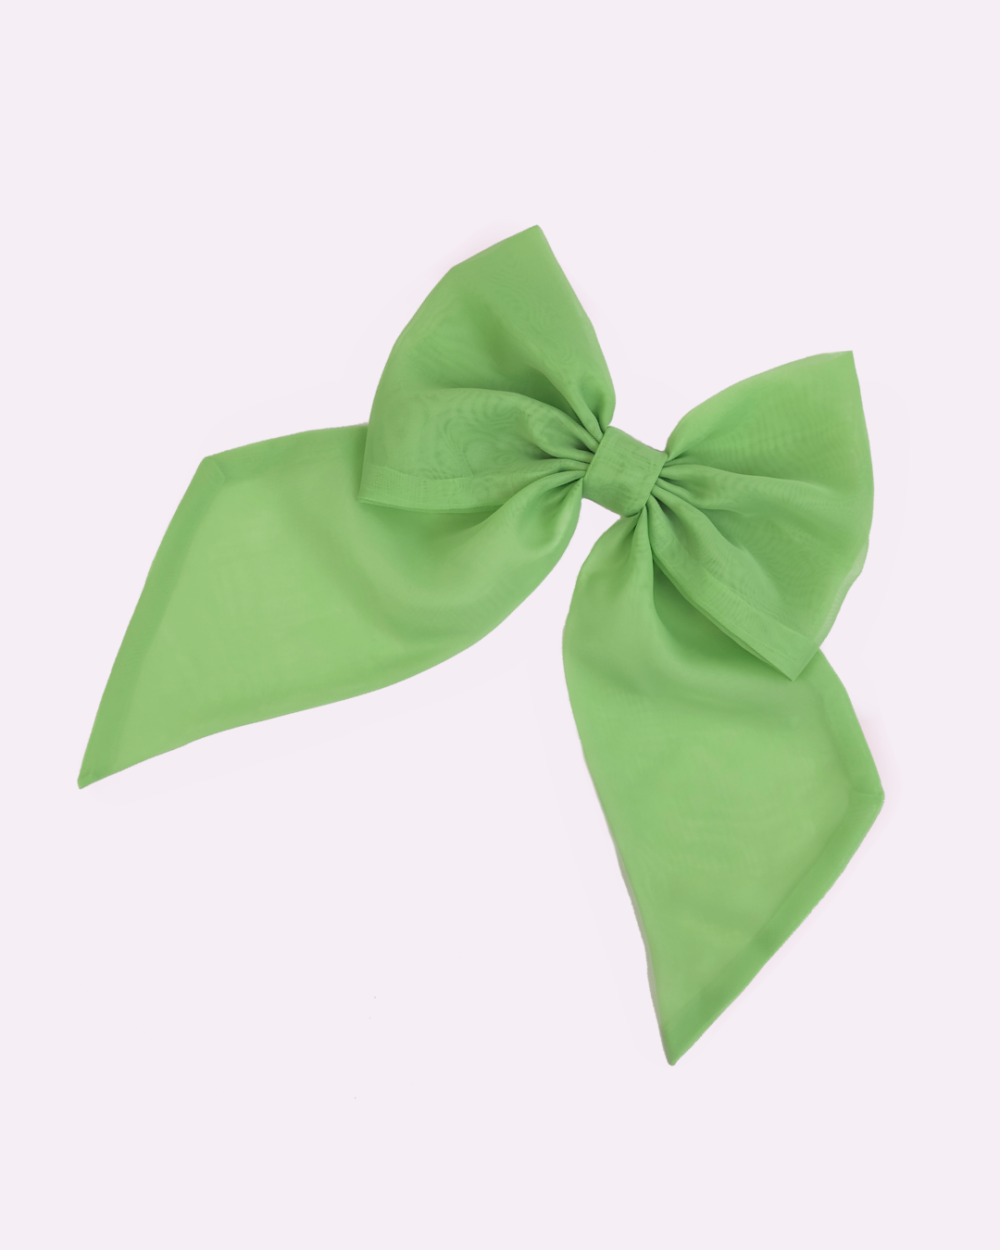 Green brooch in the shape of a giant bow made of voile by melikestea.